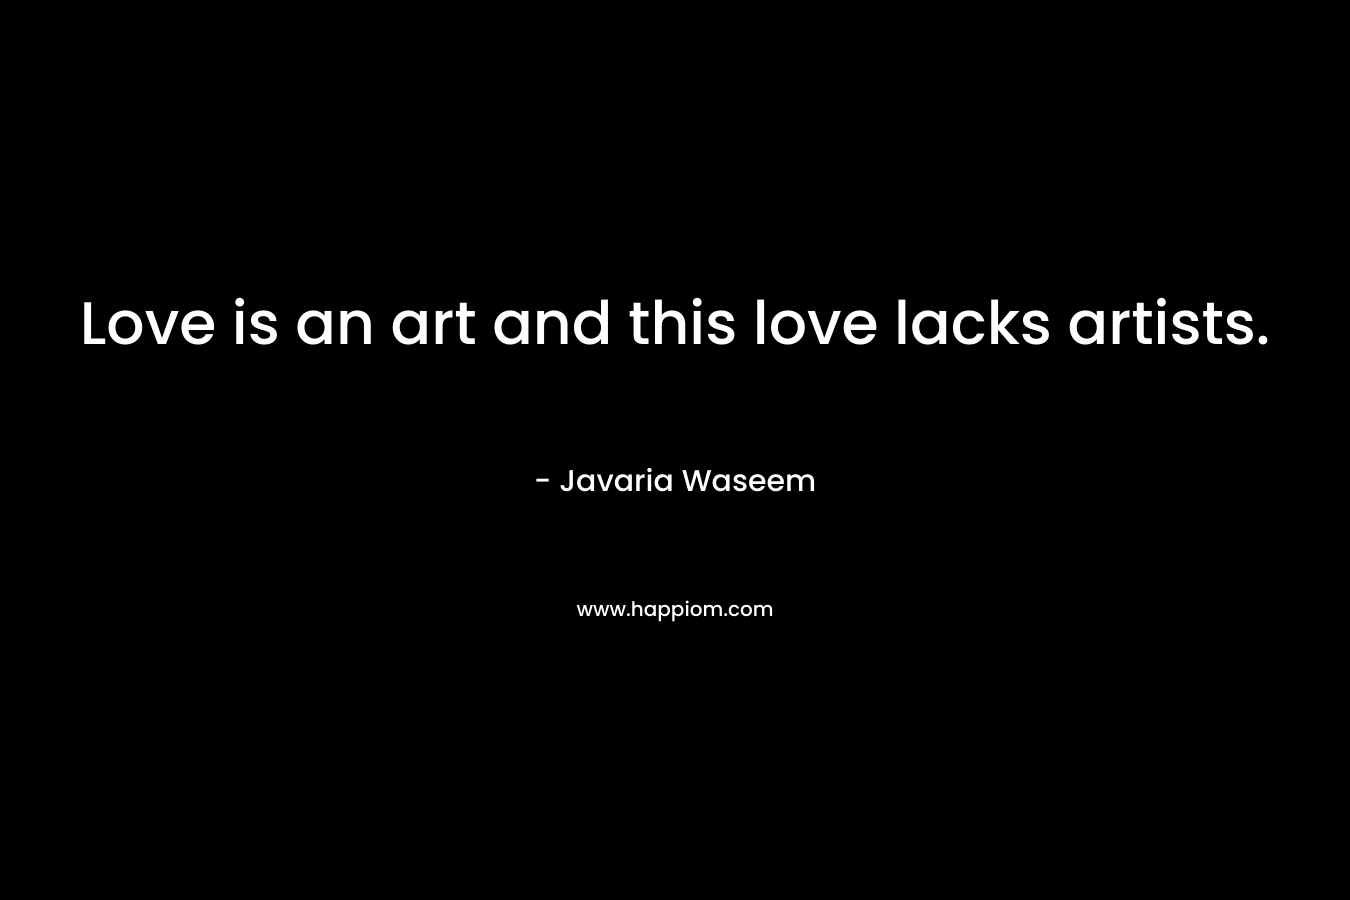 Love is an art and this love lacks artists. – Javaria Waseem